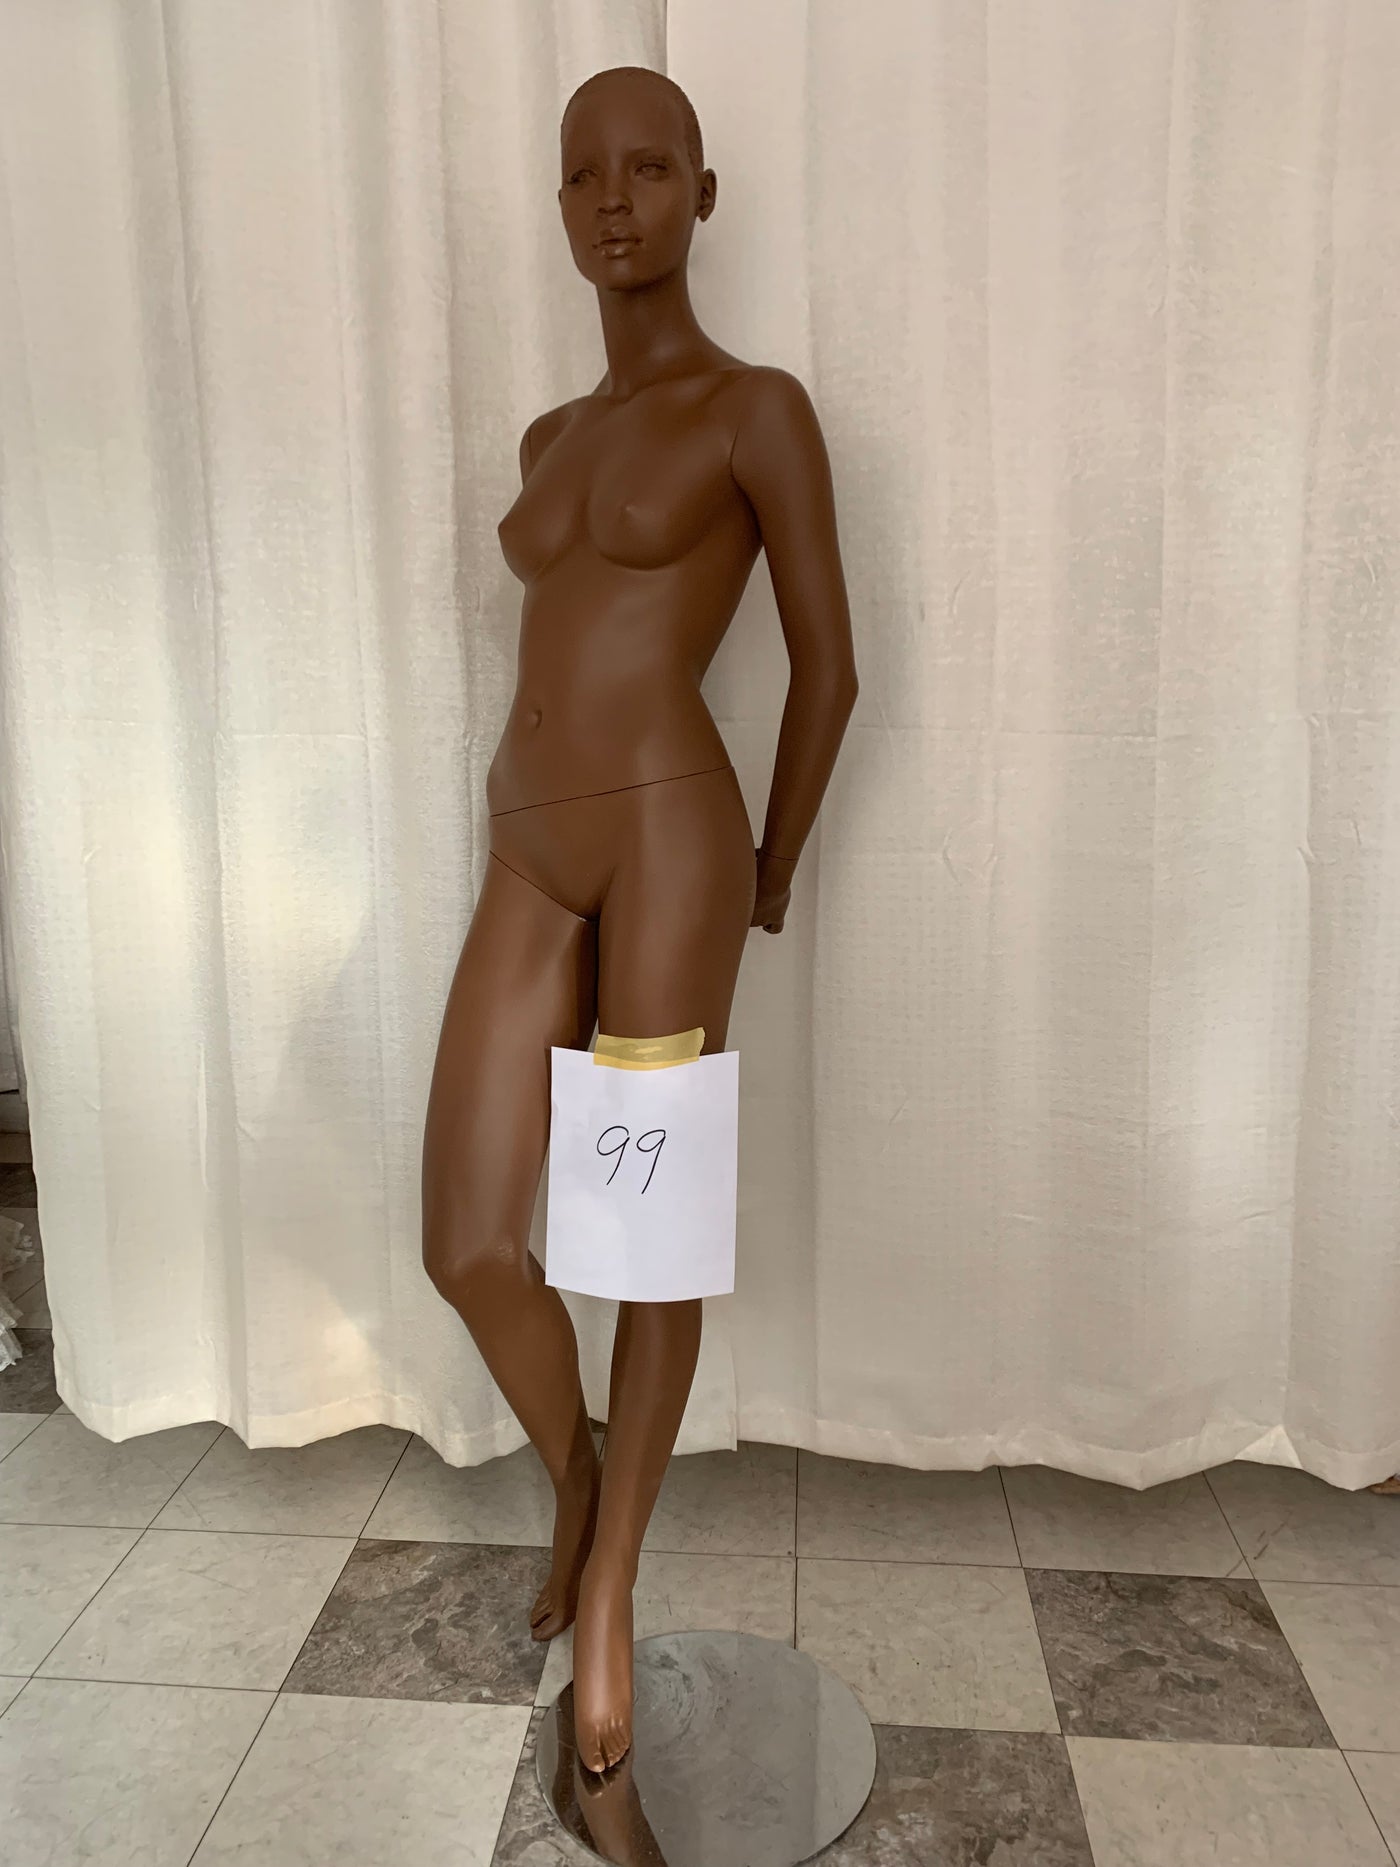 Used Female Rootstein Mannequin #99 - Nomad